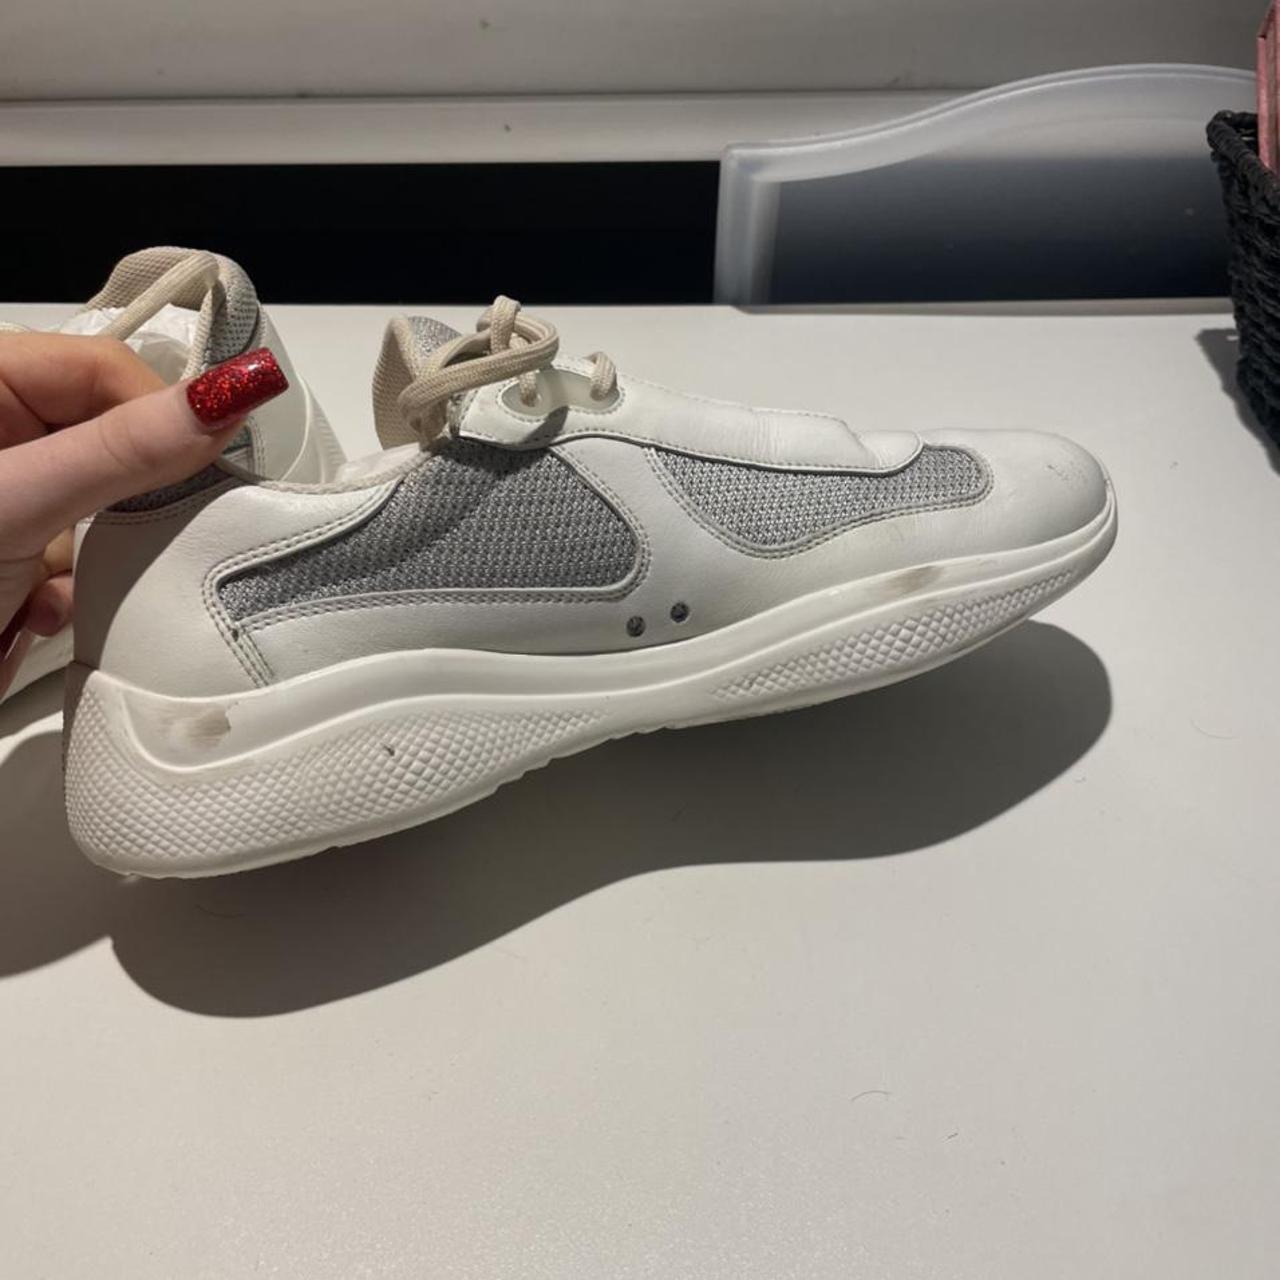 WHITE AND SILVER PRADA AMERICA’S CUP SNEAKERS SIZE... - Depop